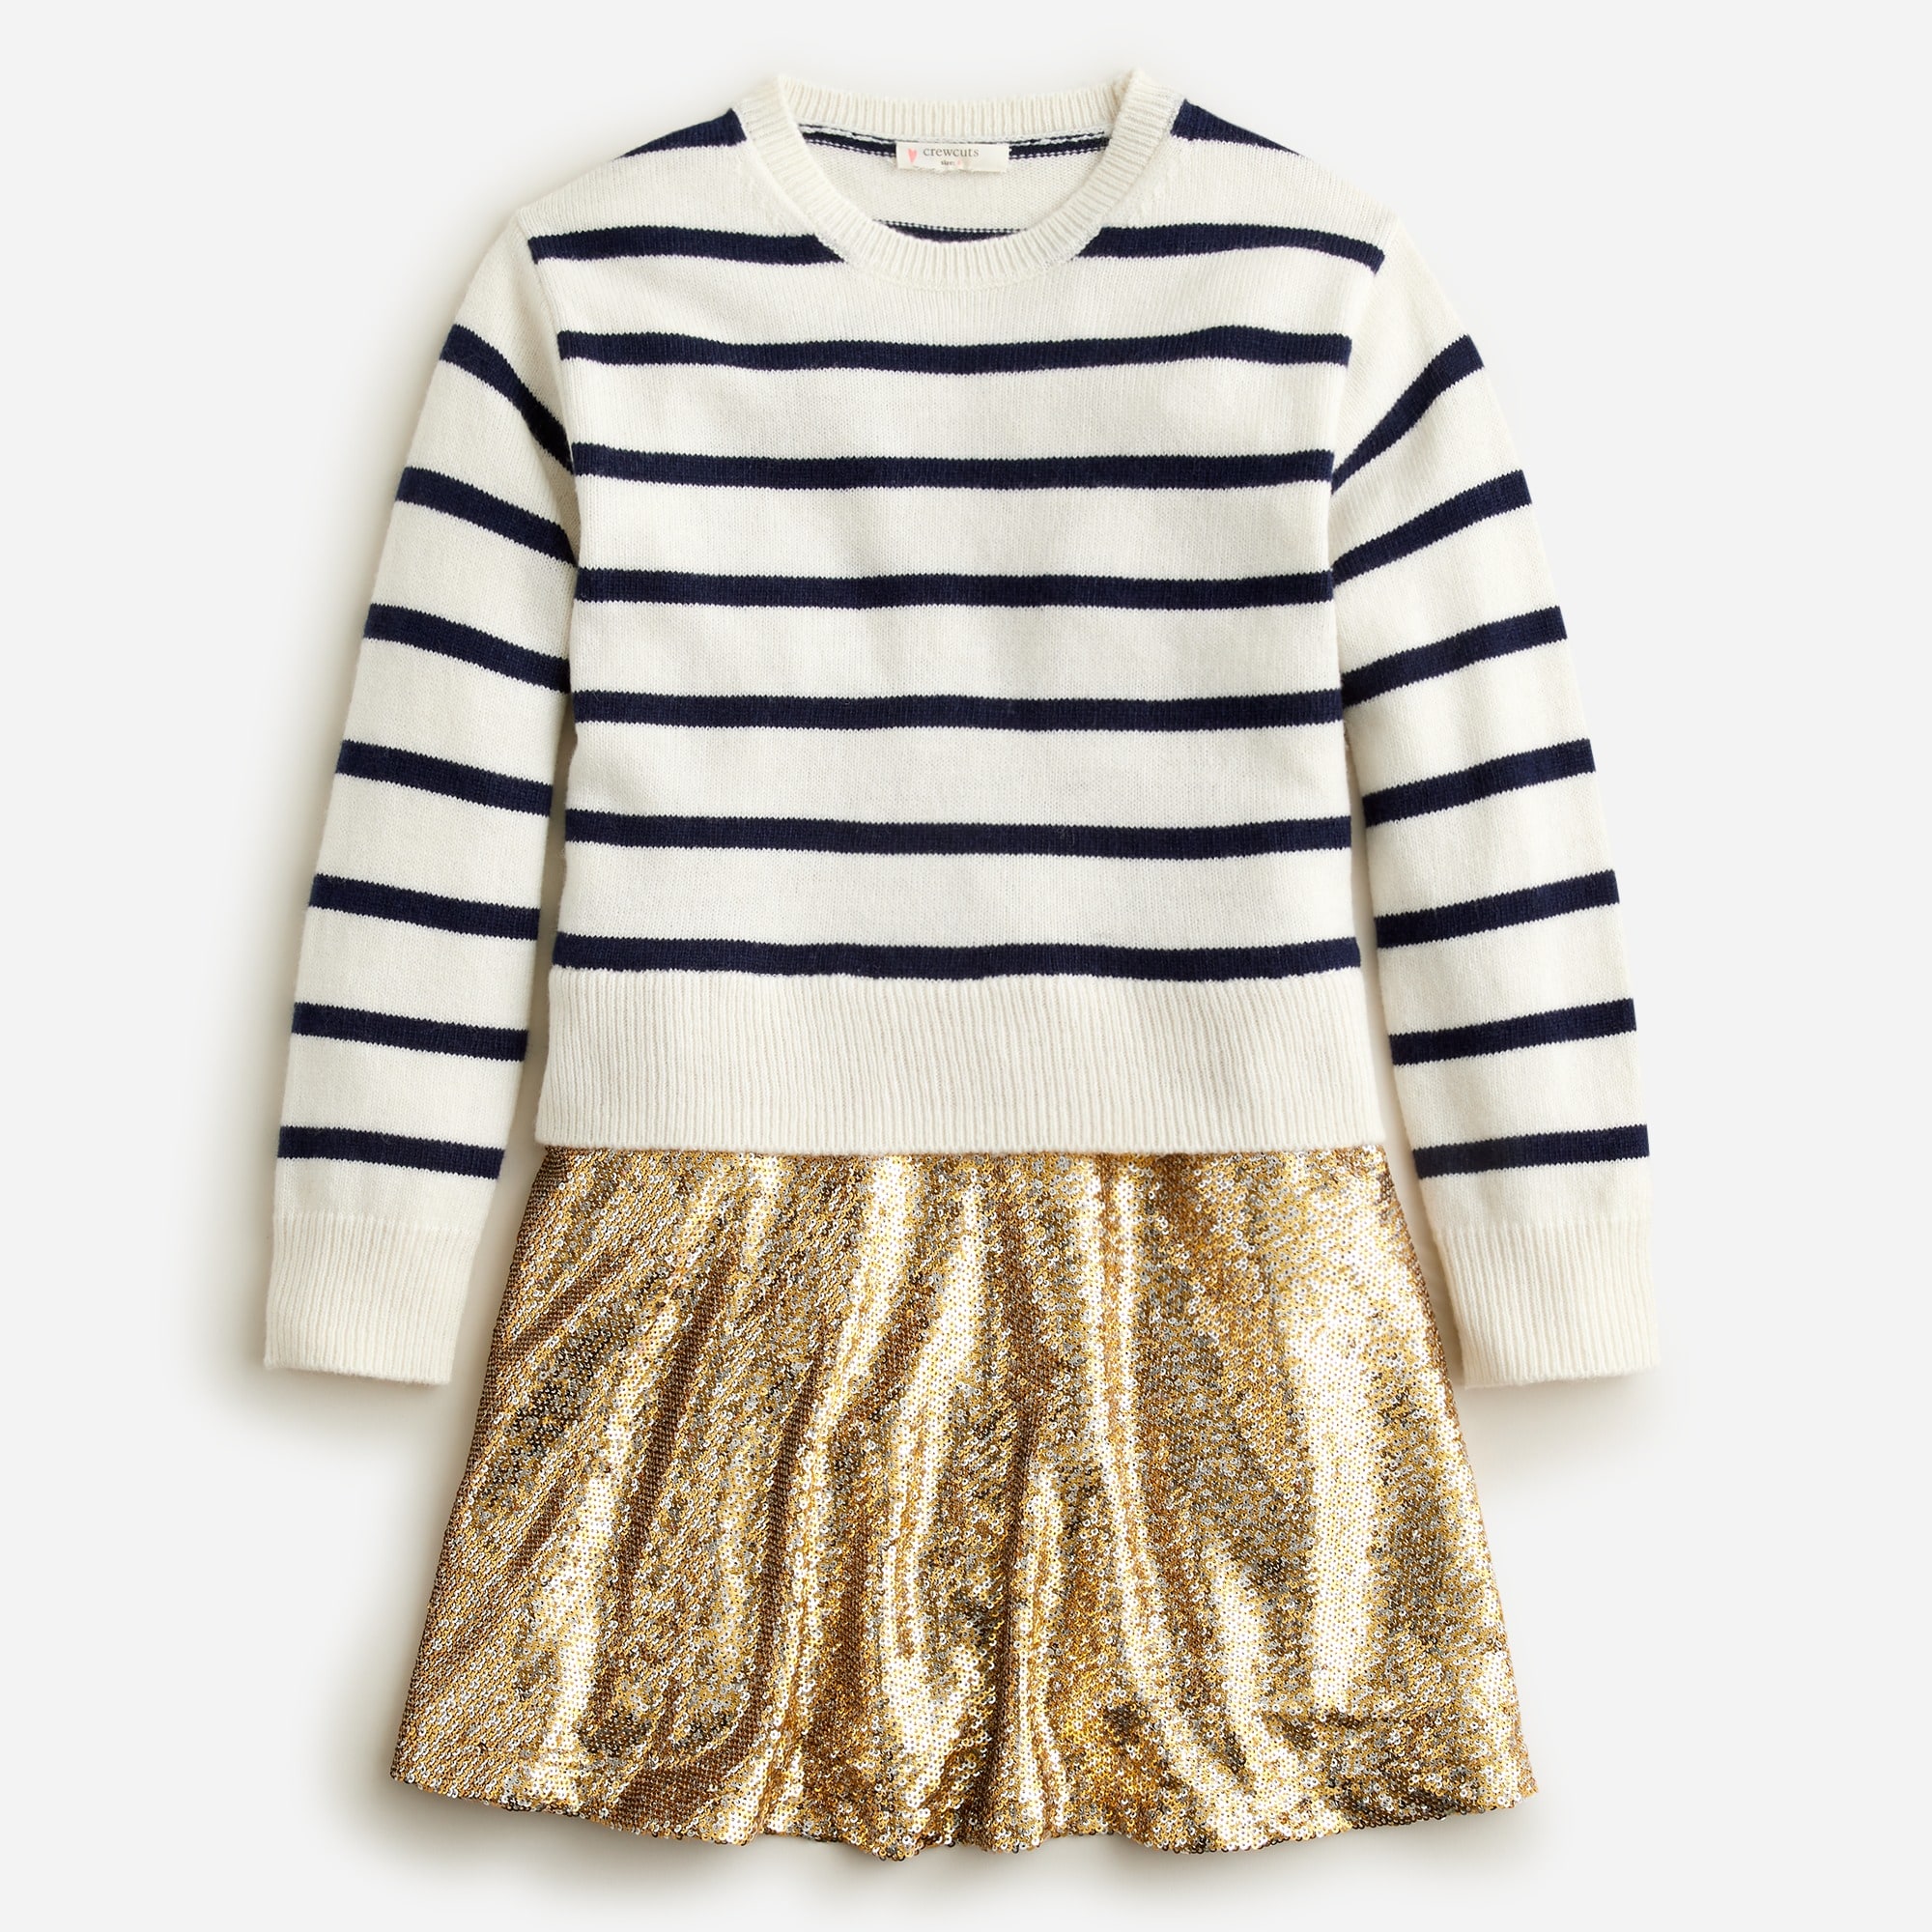  Girls' sweater mixy dress with sequins